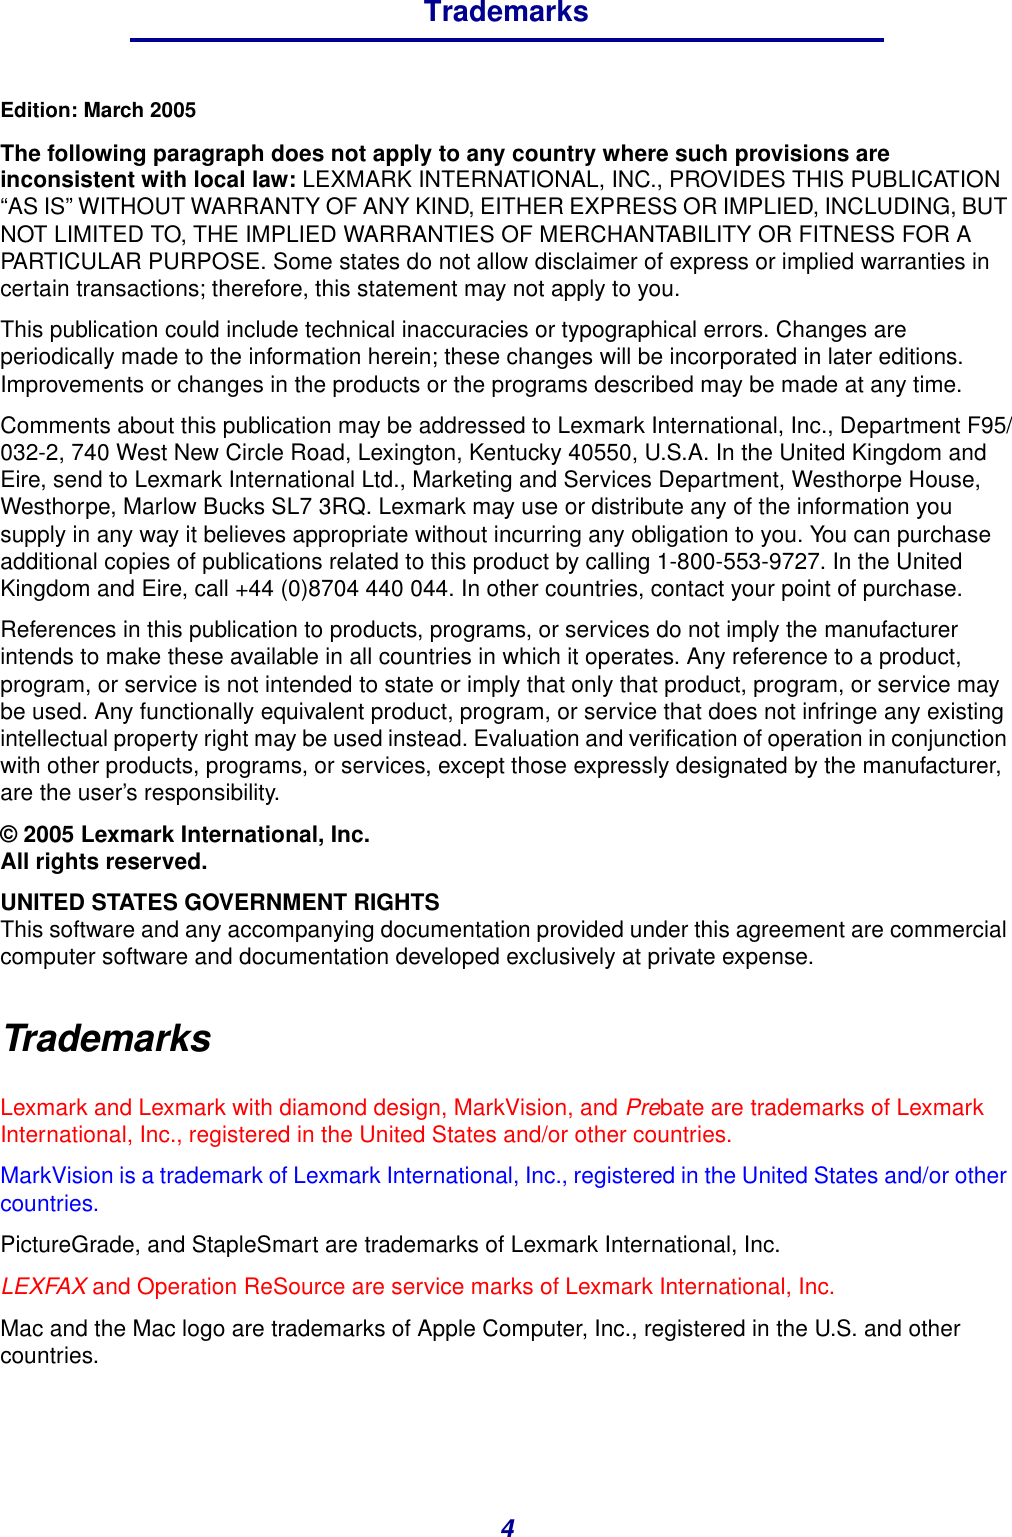 4TrademarksEdition: March 2005The following paragraph does not apply to any country where such provisions are inconsistent with local law: LEXMARK INTERNATIONAL, INC., PROVIDES THIS PUBLICATION “AS IS” WITHOUT WARRANTY OF ANY KIND, EITHER EXPRESS OR IMPLIED, INCLUDING, BUT NOT LIMITED TO, THE IMPLIED WARRANTIES OF MERCHANTABILITY OR FITNESS FOR A PARTICULAR PURPOSE. Some states do not allow disclaimer of express or implied warranties in certain transactions; therefore, this statement may not apply to you.This publication could include technical inaccuracies or typographical errors. Changes are periodically made to the information herein; these changes will be incorporated in later editions. Improvements or changes in the products or the programs described may be made at any time.Comments about this publication may be addressed to Lexmark International, Inc., Department F95/032-2, 740 West New Circle Road, Lexington, Kentucky 40550, U.S.A. In the United Kingdom and Eire, send to Lexmark International Ltd., Marketing and Services Department, Westhorpe House, Westhorpe, Marlow Bucks SL7 3RQ. Lexmark may use or distribute any of the information you supply in any way it believes appropriate without incurring any obligation to you. You can purchase additional copies of publications related to this product by calling 1-800-553-9727. In the United Kingdom and Eire, call +44 (0)8704 440 044. In other countries, contact your point of purchase.References in this publication to products, programs, or services do not imply the manufacturer intends to make these available in all countries in which it operates. Any reference to a product, program, or service is not intended to state or imply that only that product, program, or service may be used. Any functionally equivalent product, program, or service that does not infringe any existing intellectual property right may be used instead. Evaluation and verification of operation in conjunction with other products, programs, or services, except those expressly designated by the manufacturer, are the user’s responsibility.© 2005 Lexmark International, Inc.All rights reserved.UNITED STATES GOVERNMENT RIGHTSThis software and any accompanying documentation provided under this agreement are commercial computer software and documentation developed exclusively at private expense.TrademarksLexmark and Lexmark with diamond design, MarkVision, and Prebate are trademarks of Lexmark International, Inc., registered in the United States and/or other countries.MarkVision is a trademark of Lexmark International, Inc., registered in the United States and/or other countries.PictureGrade, and StapleSmart are trademarks of Lexmark International, Inc.LEXFAX and Operation ReSource are service marks of Lexmark International, Inc.Mac and the Mac logo are trademarks of Apple Computer, Inc., registered in the U.S. and other countries.